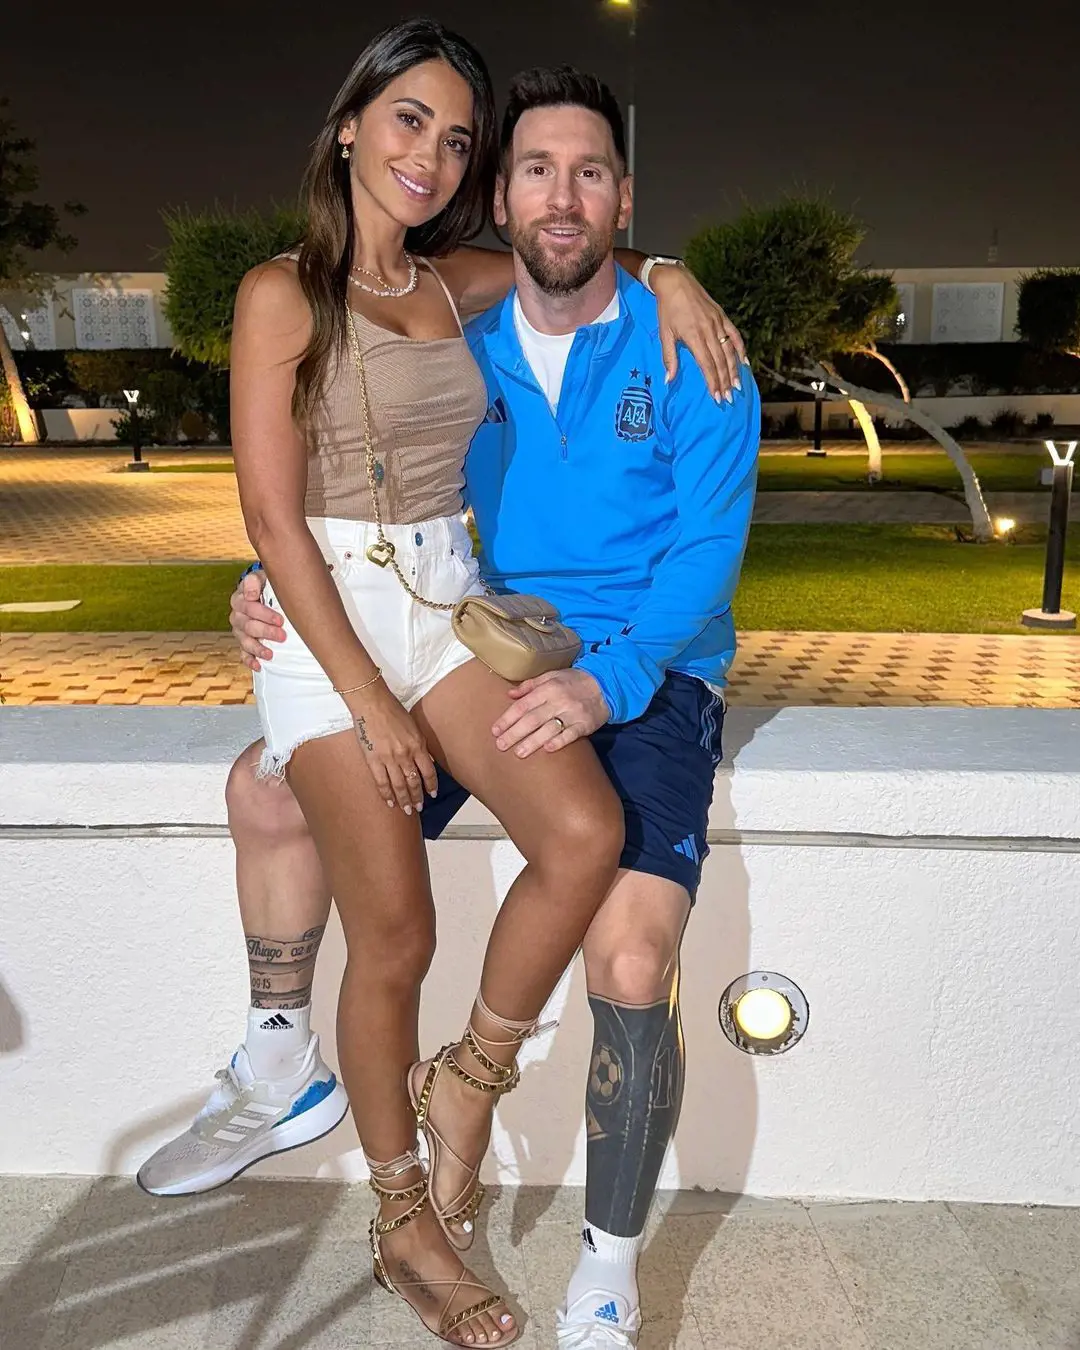 Argentine football hero Lionel Messi relishing date night with his wife Antonela Roccuzzo at Qatar in December 2022